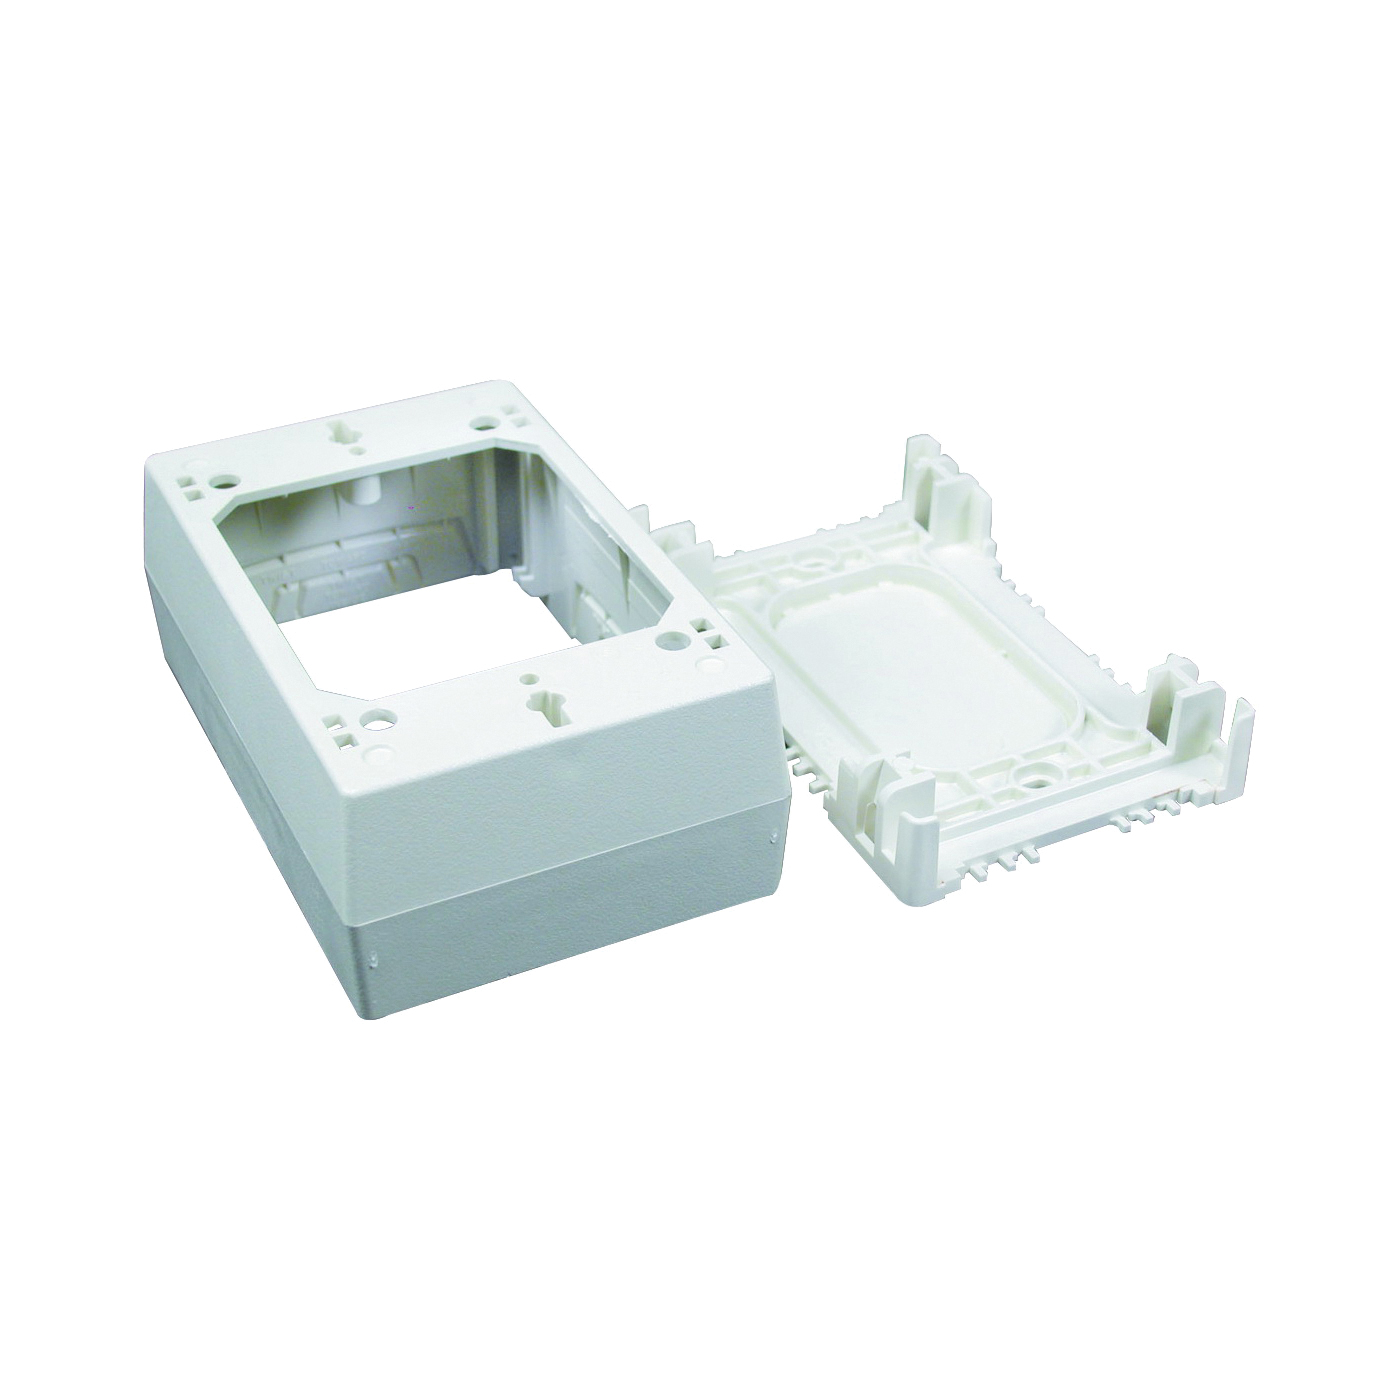 NM NM35 Outlet Box, 0 -Knockout, Plastic, Ivory, Wall Mounting